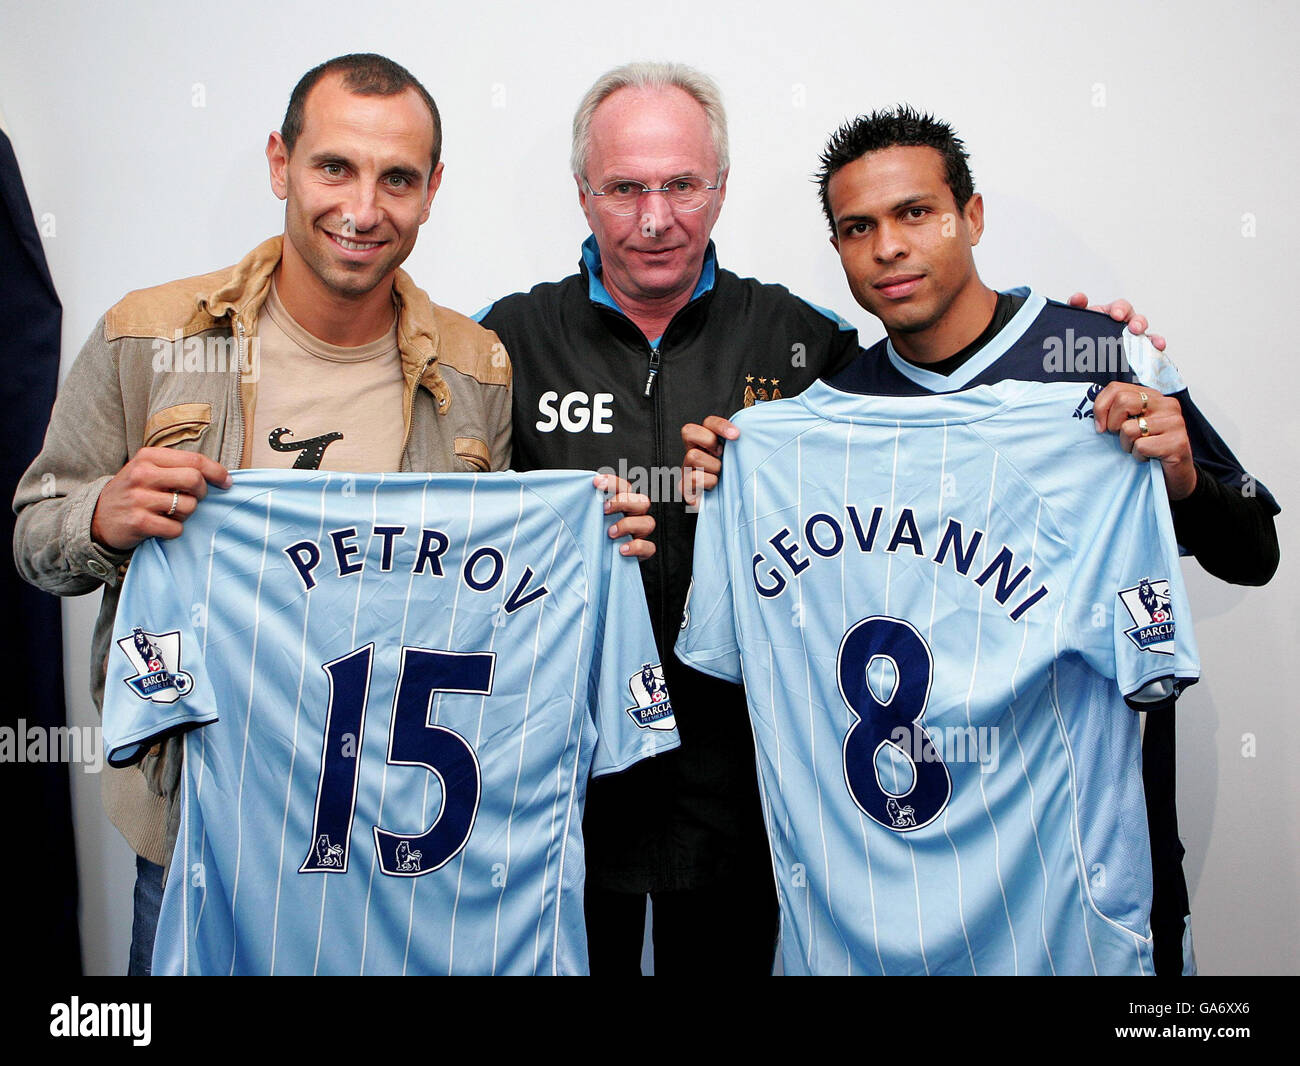 Manchester City manager Sven Goran Eriksson (centre) with new signings Martin Petrov and Geovanni at thier training ground in Carrington, Manchester. Stock Photo